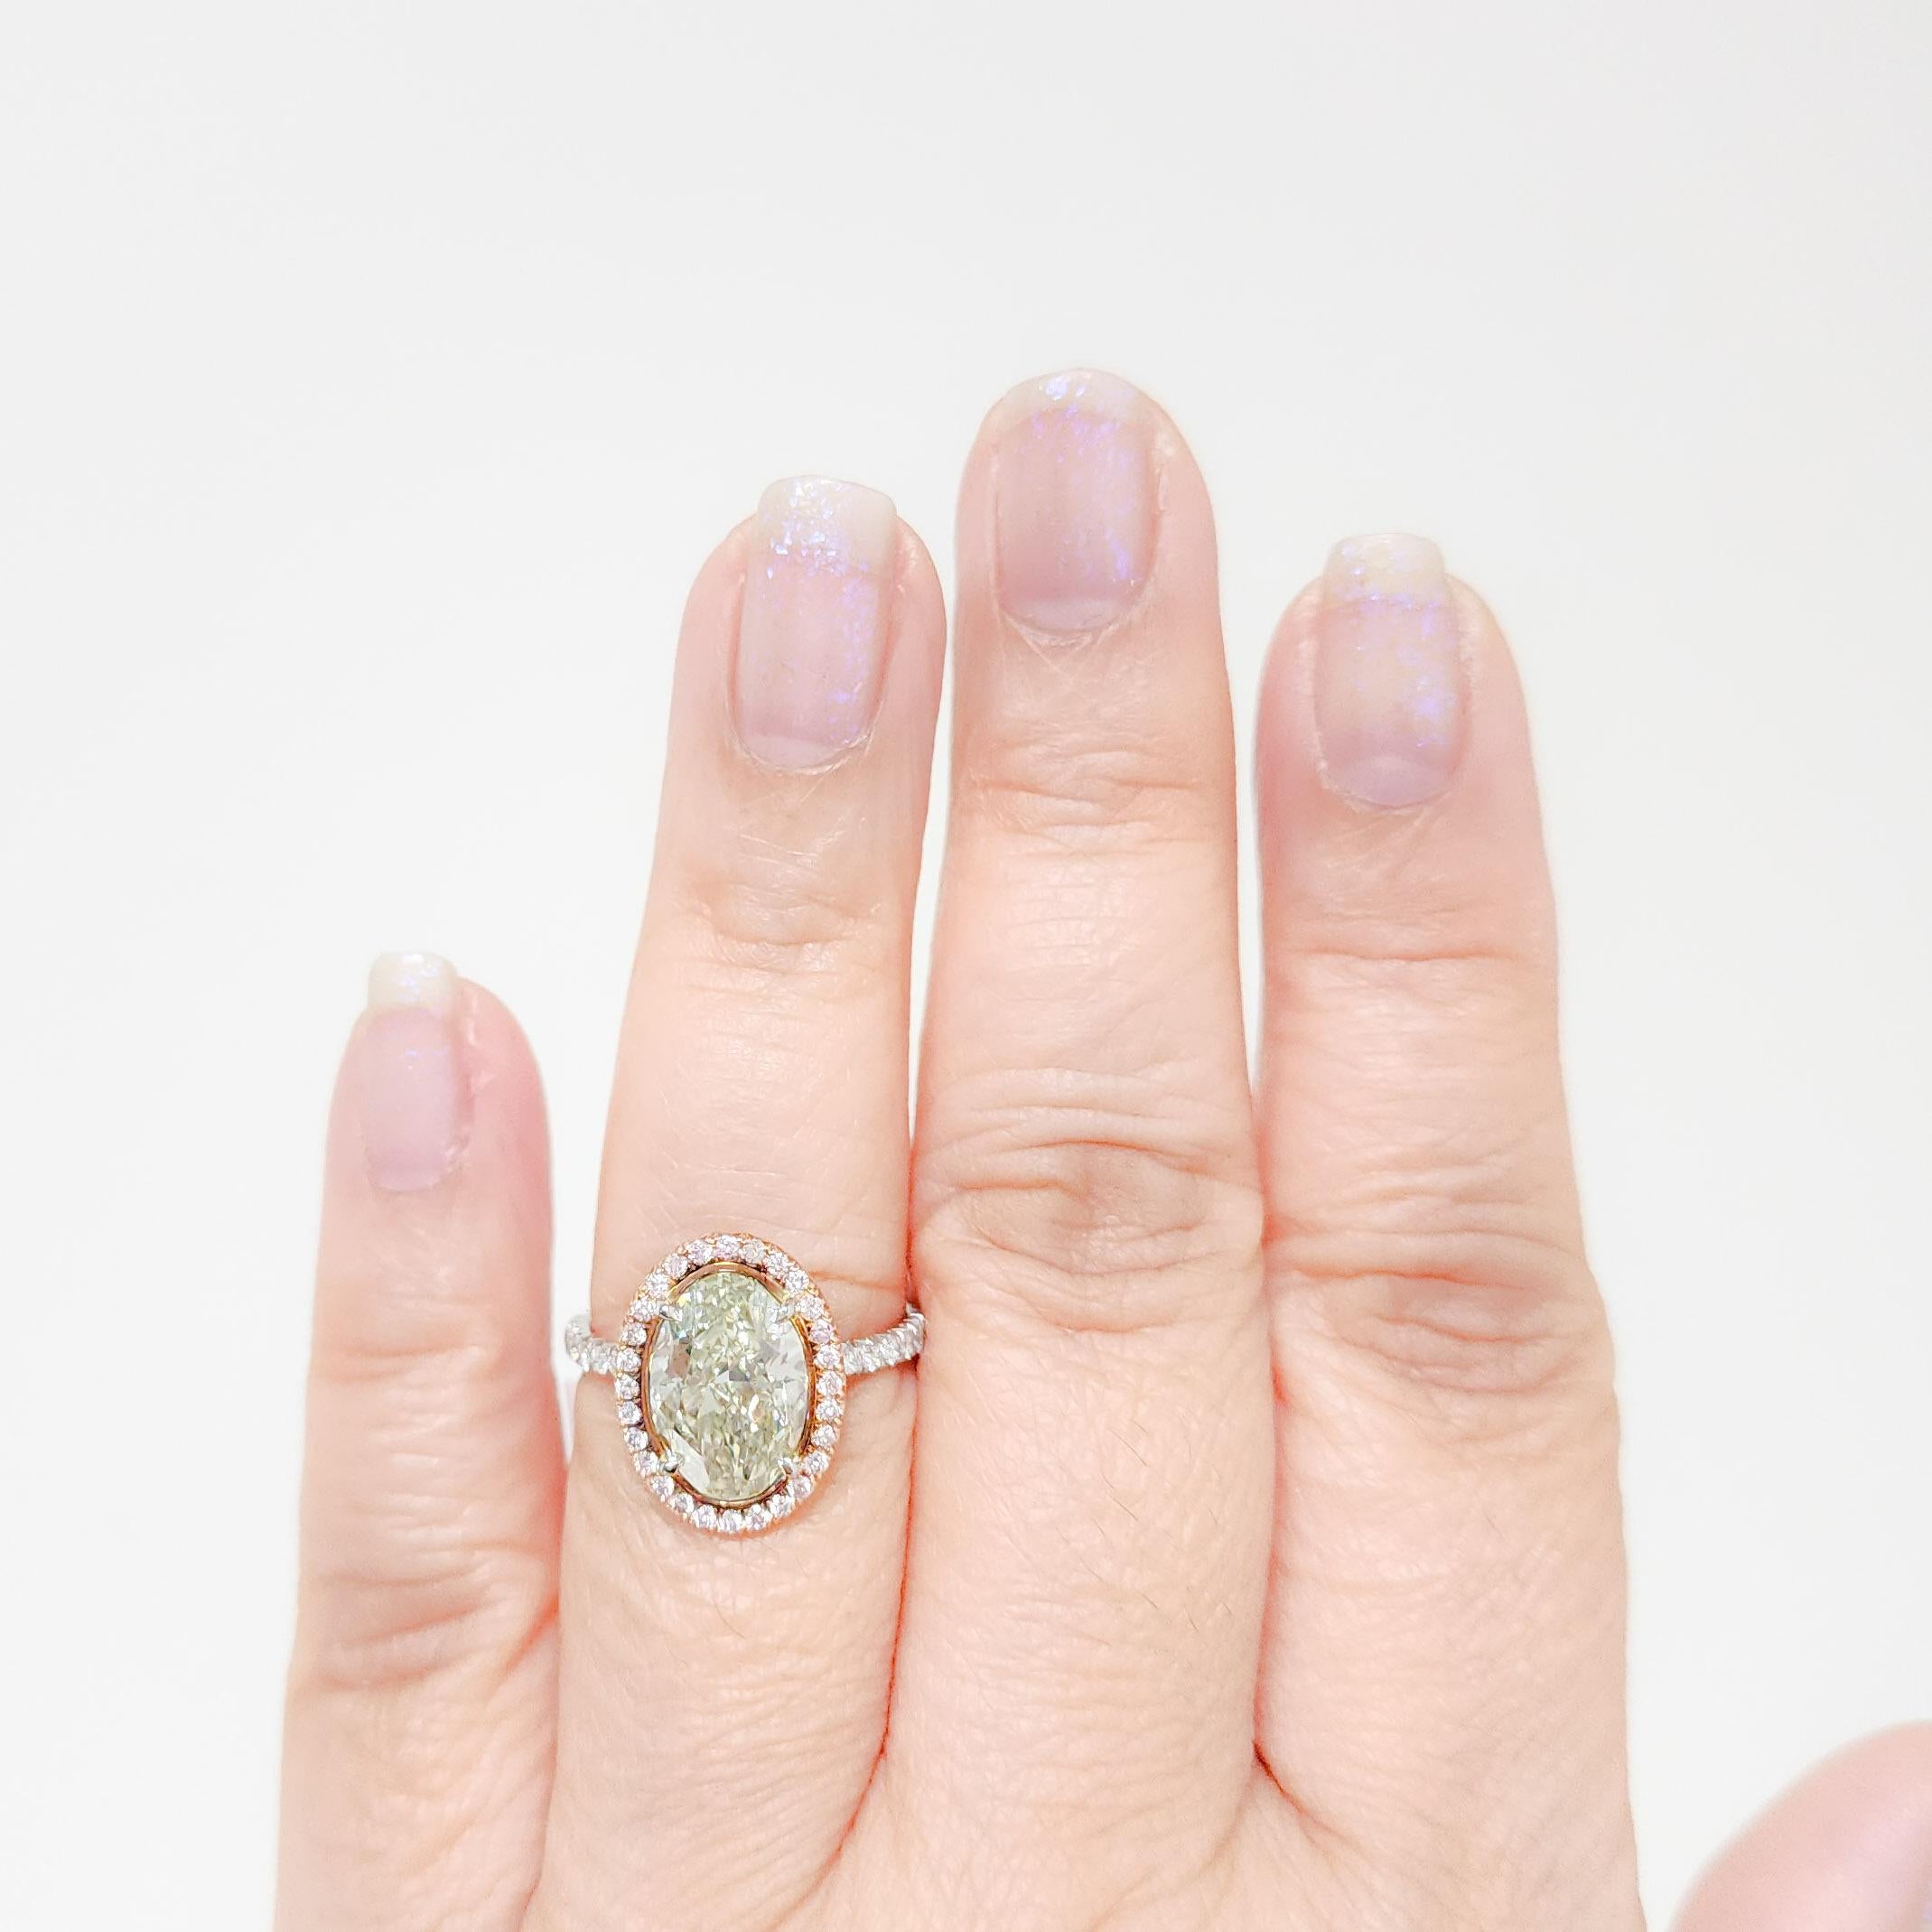 Stunning 3.49 ct. fancy yellow green oval SI1 with 0.25 ct. natural pink diamond rounds.  Handmade in platinum and 18k rose gold.  Ring size 7.  GIA certificate included.